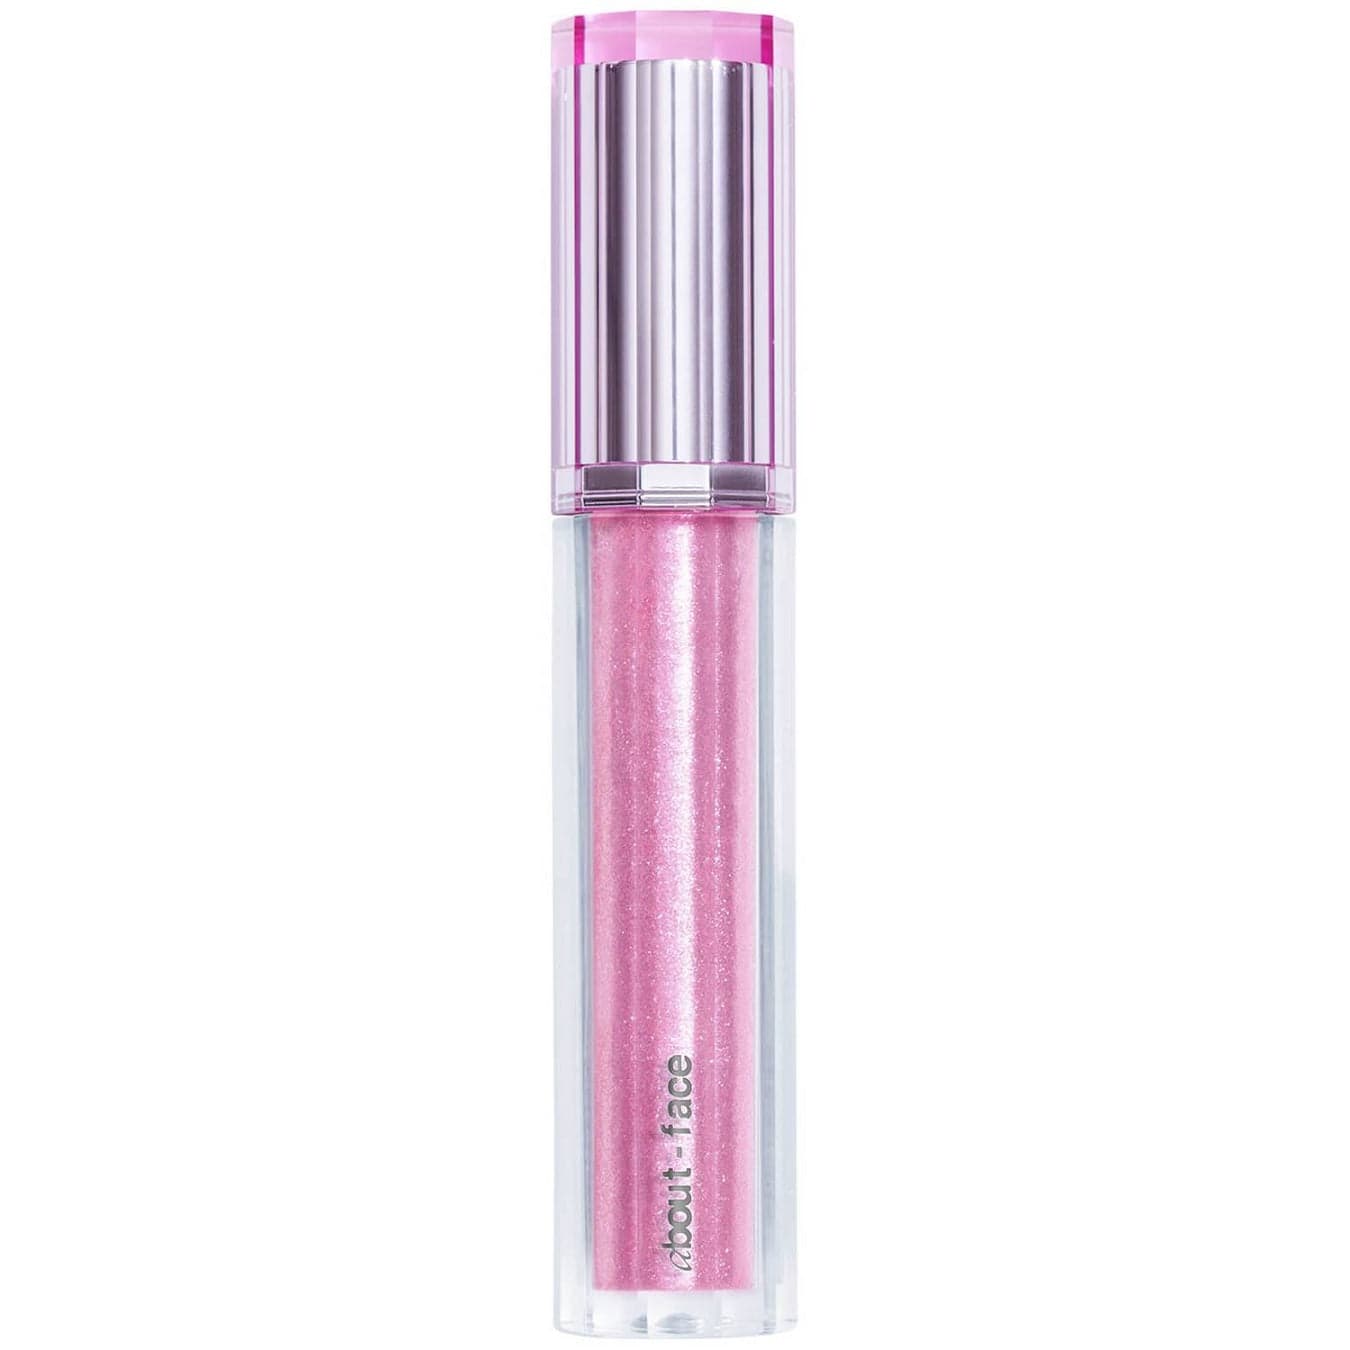 About-Face Beauty About-Face Light Lock Lip Gloss 4.3ml, It's Not You, It's Me